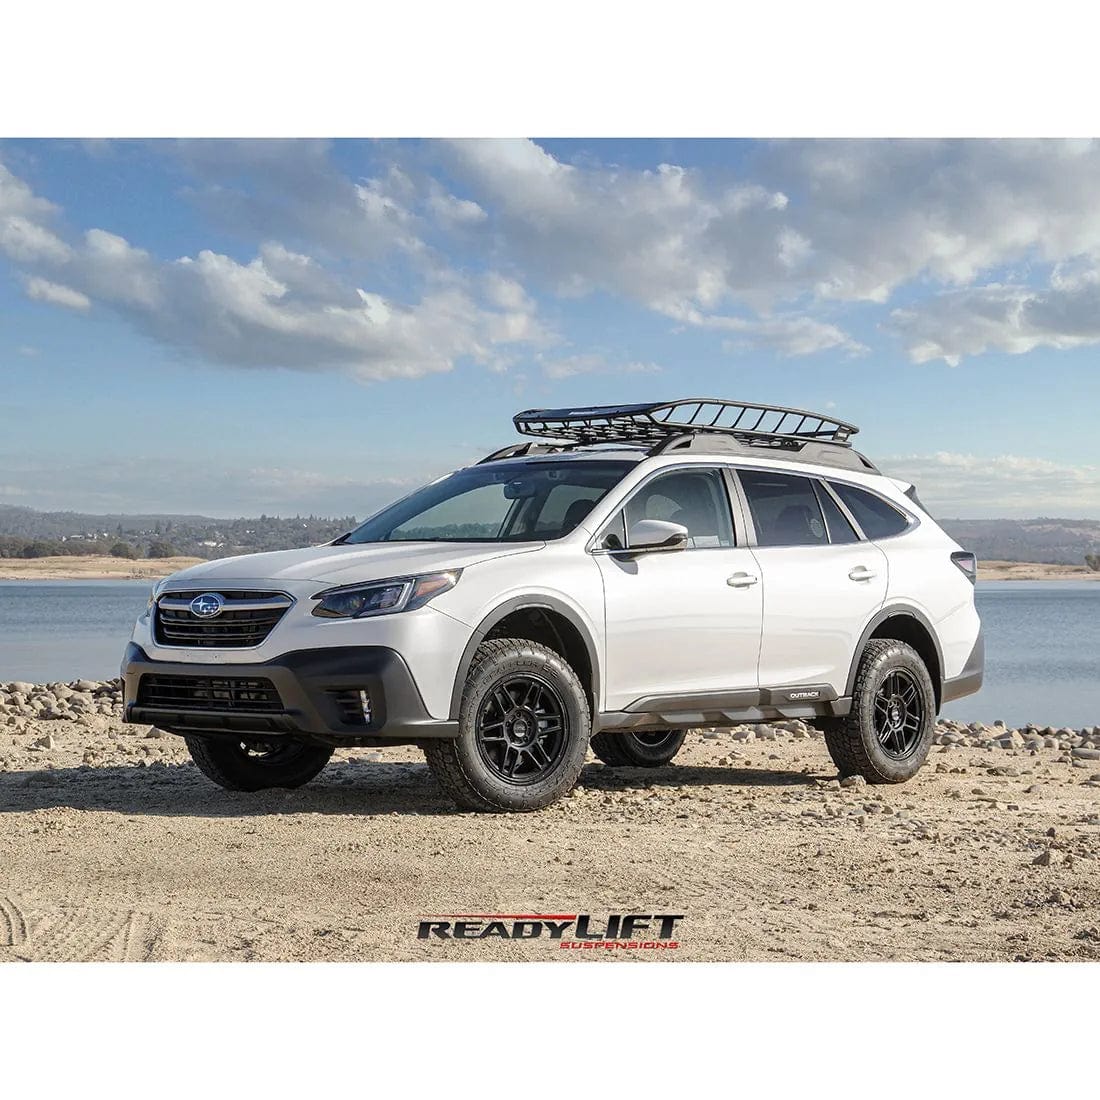 ReadyLift 2.0" SST Lift Kit for 2020-2022 Subaru Outback 69-9020